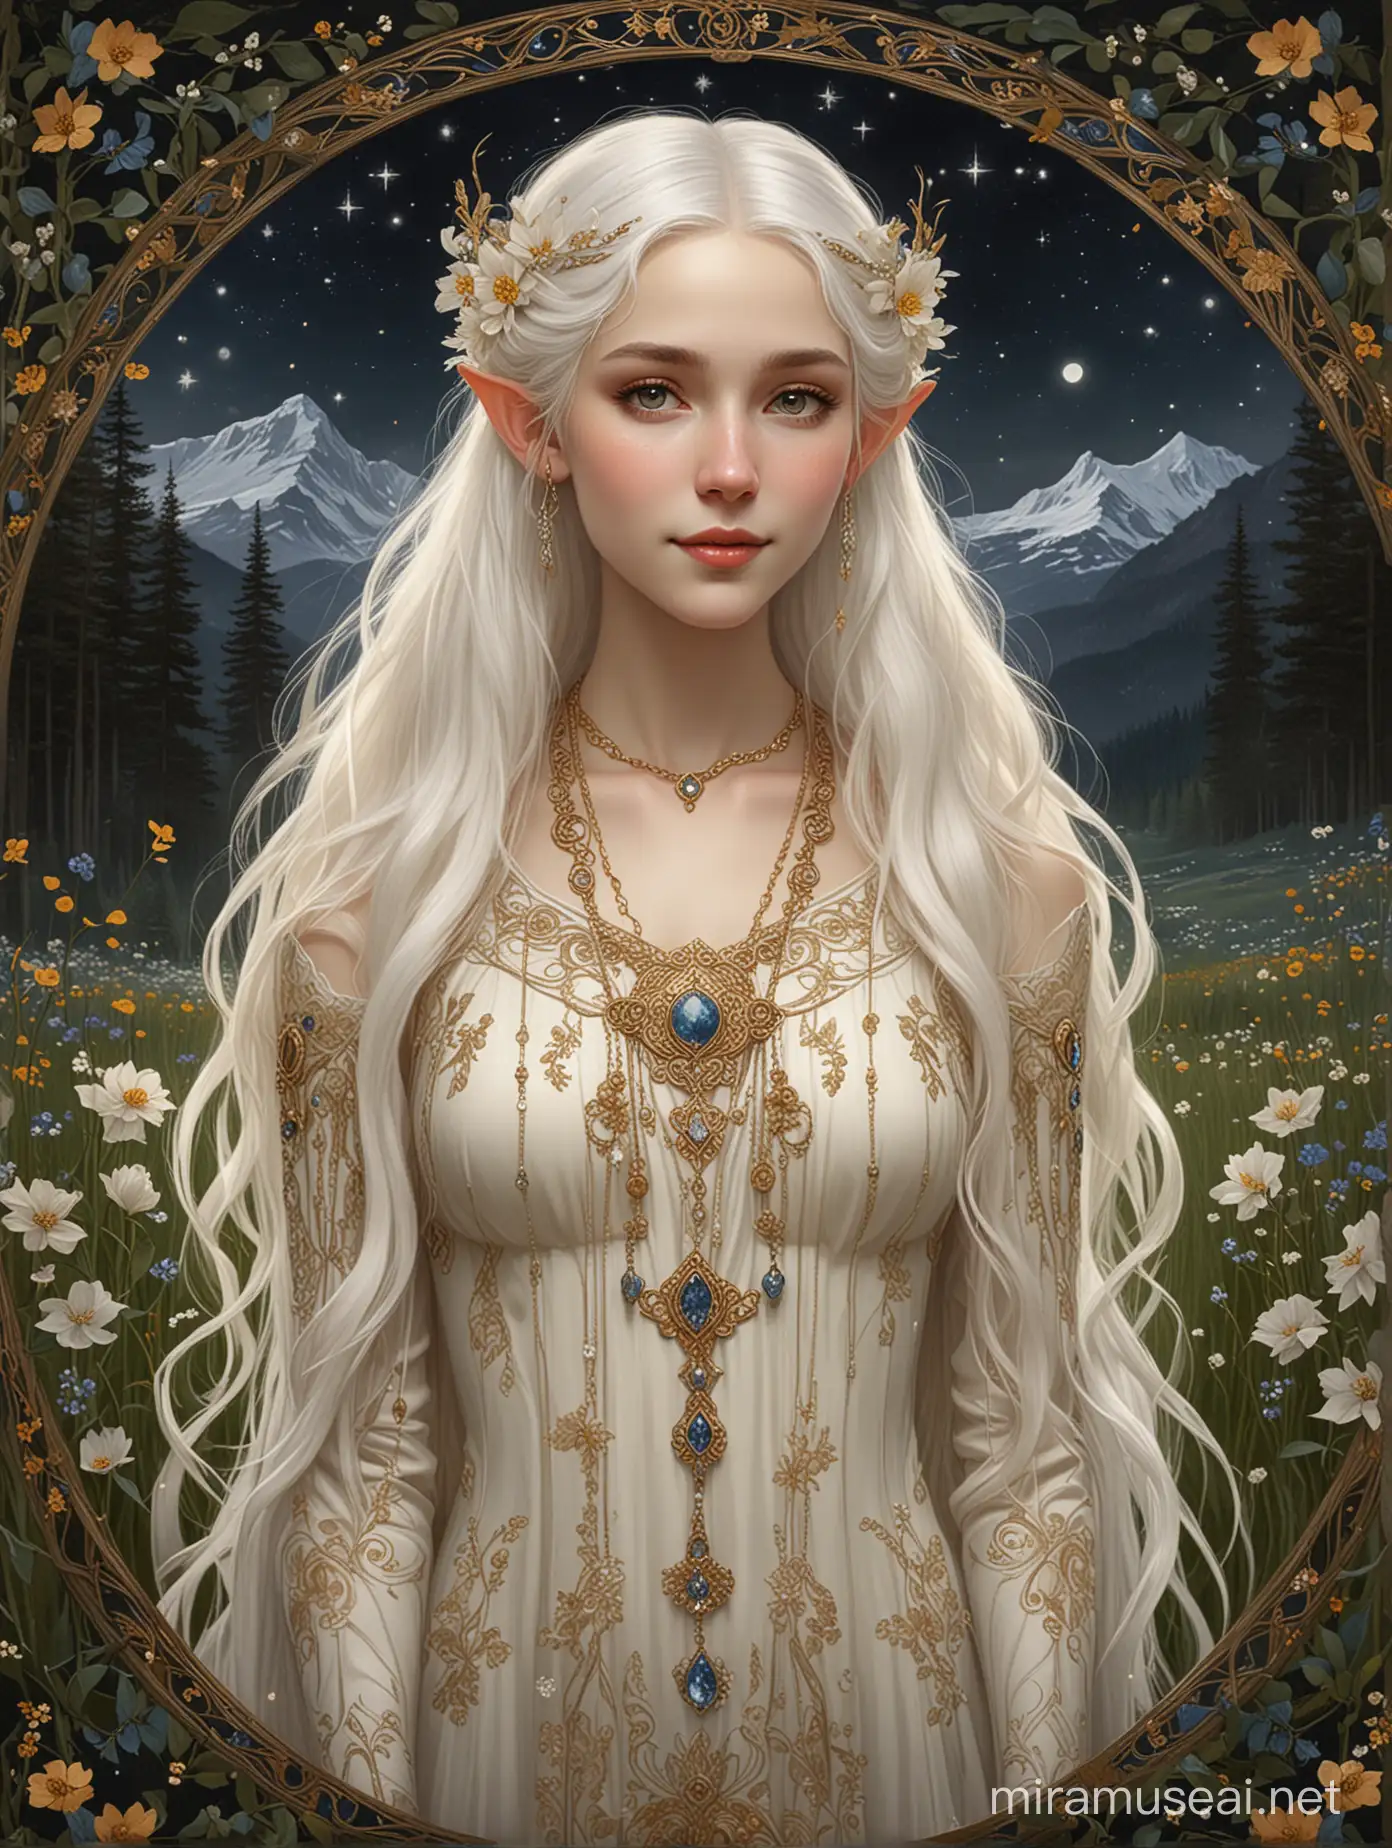 Enchanting Elf with Elongated Ears in a Flowery Meadow at Night